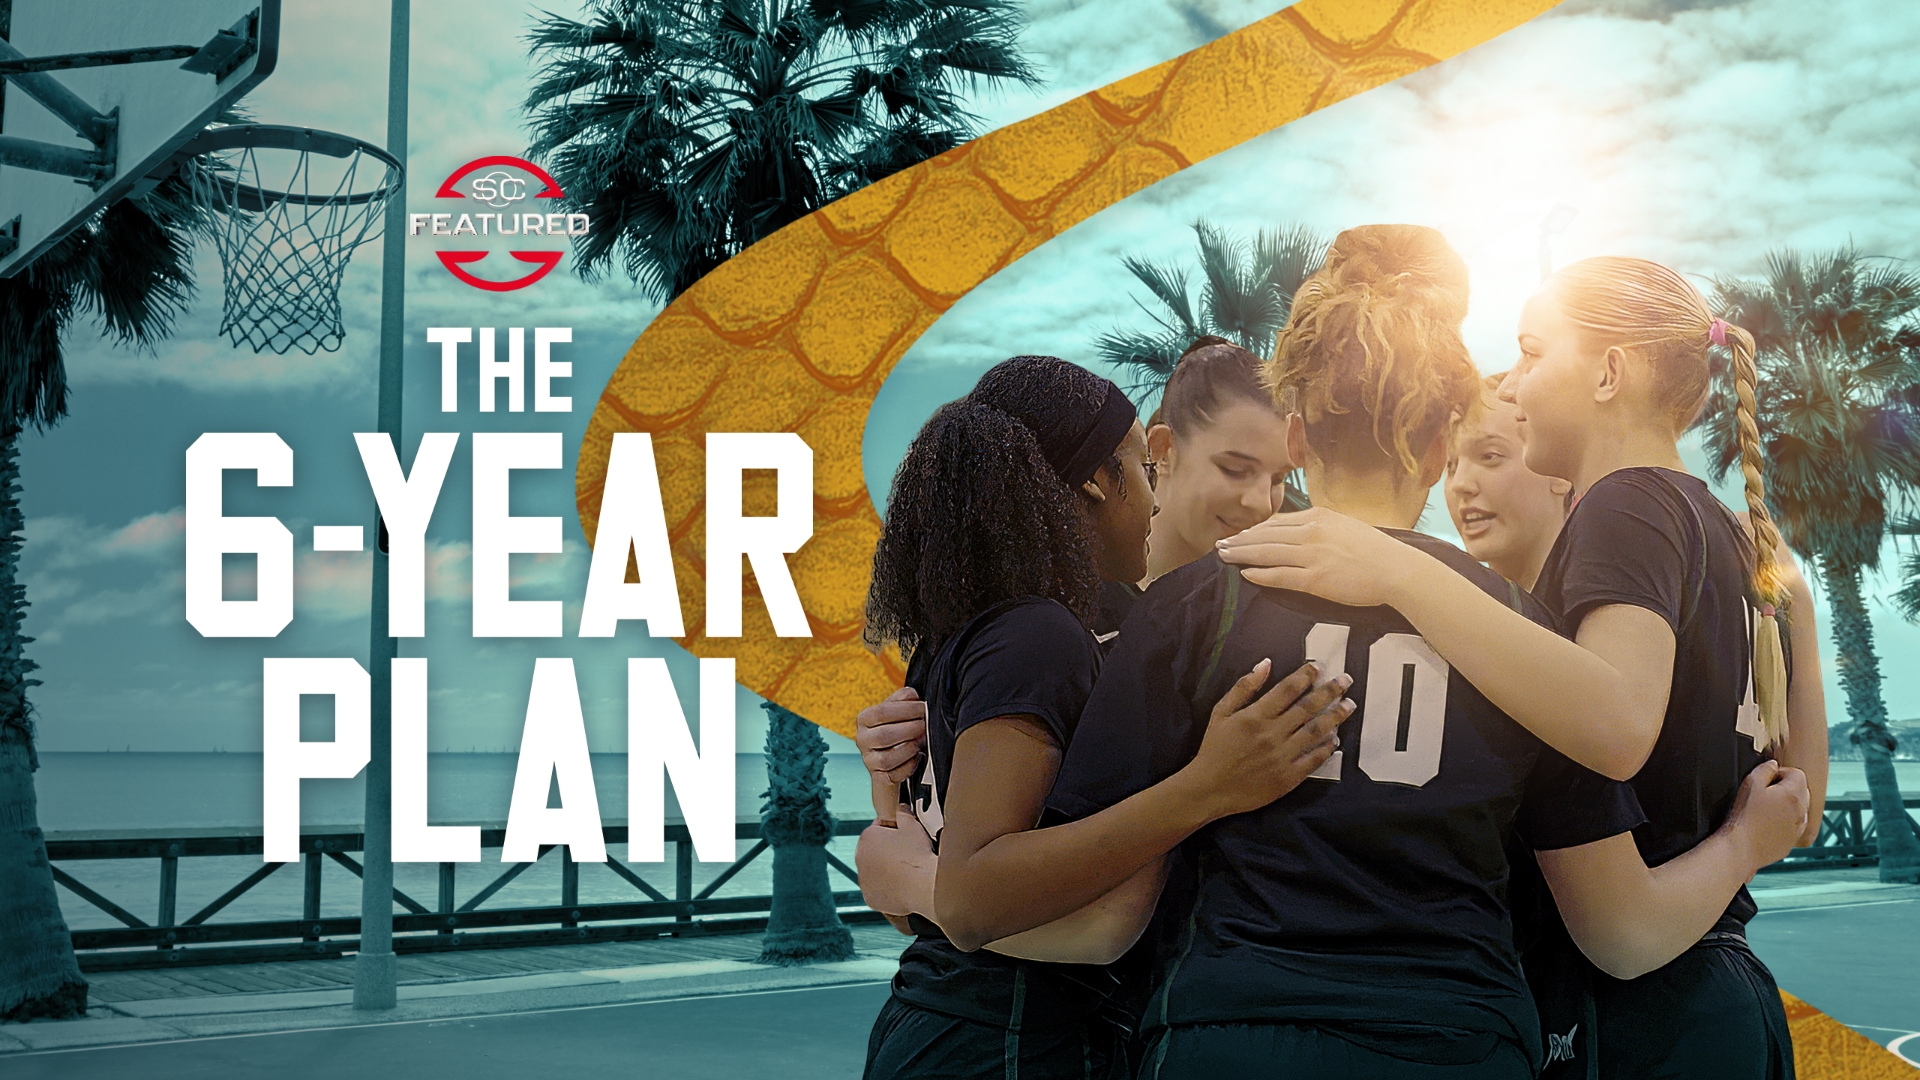 SC Featured: The 6-Year Plan